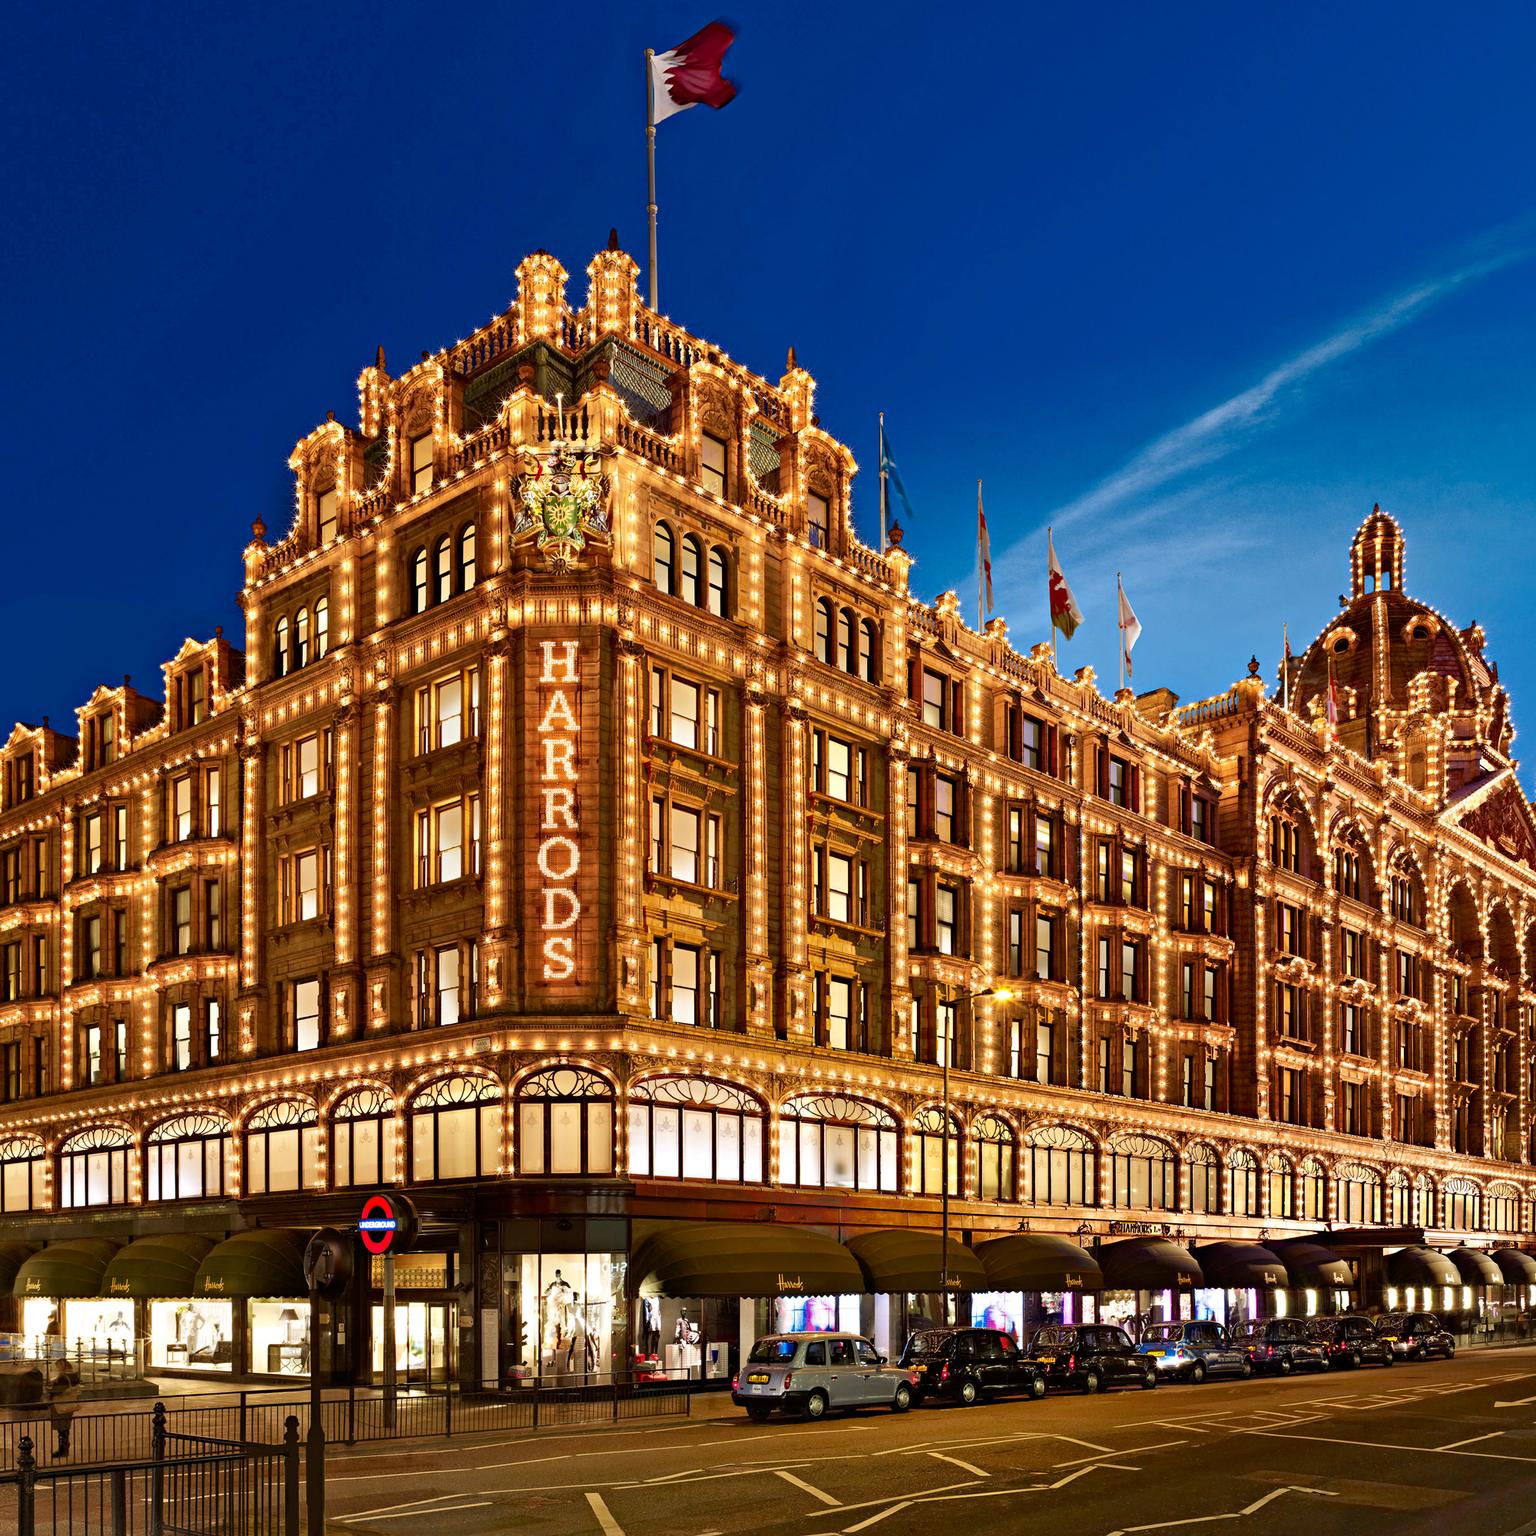 Exterior of Harrods department store at night